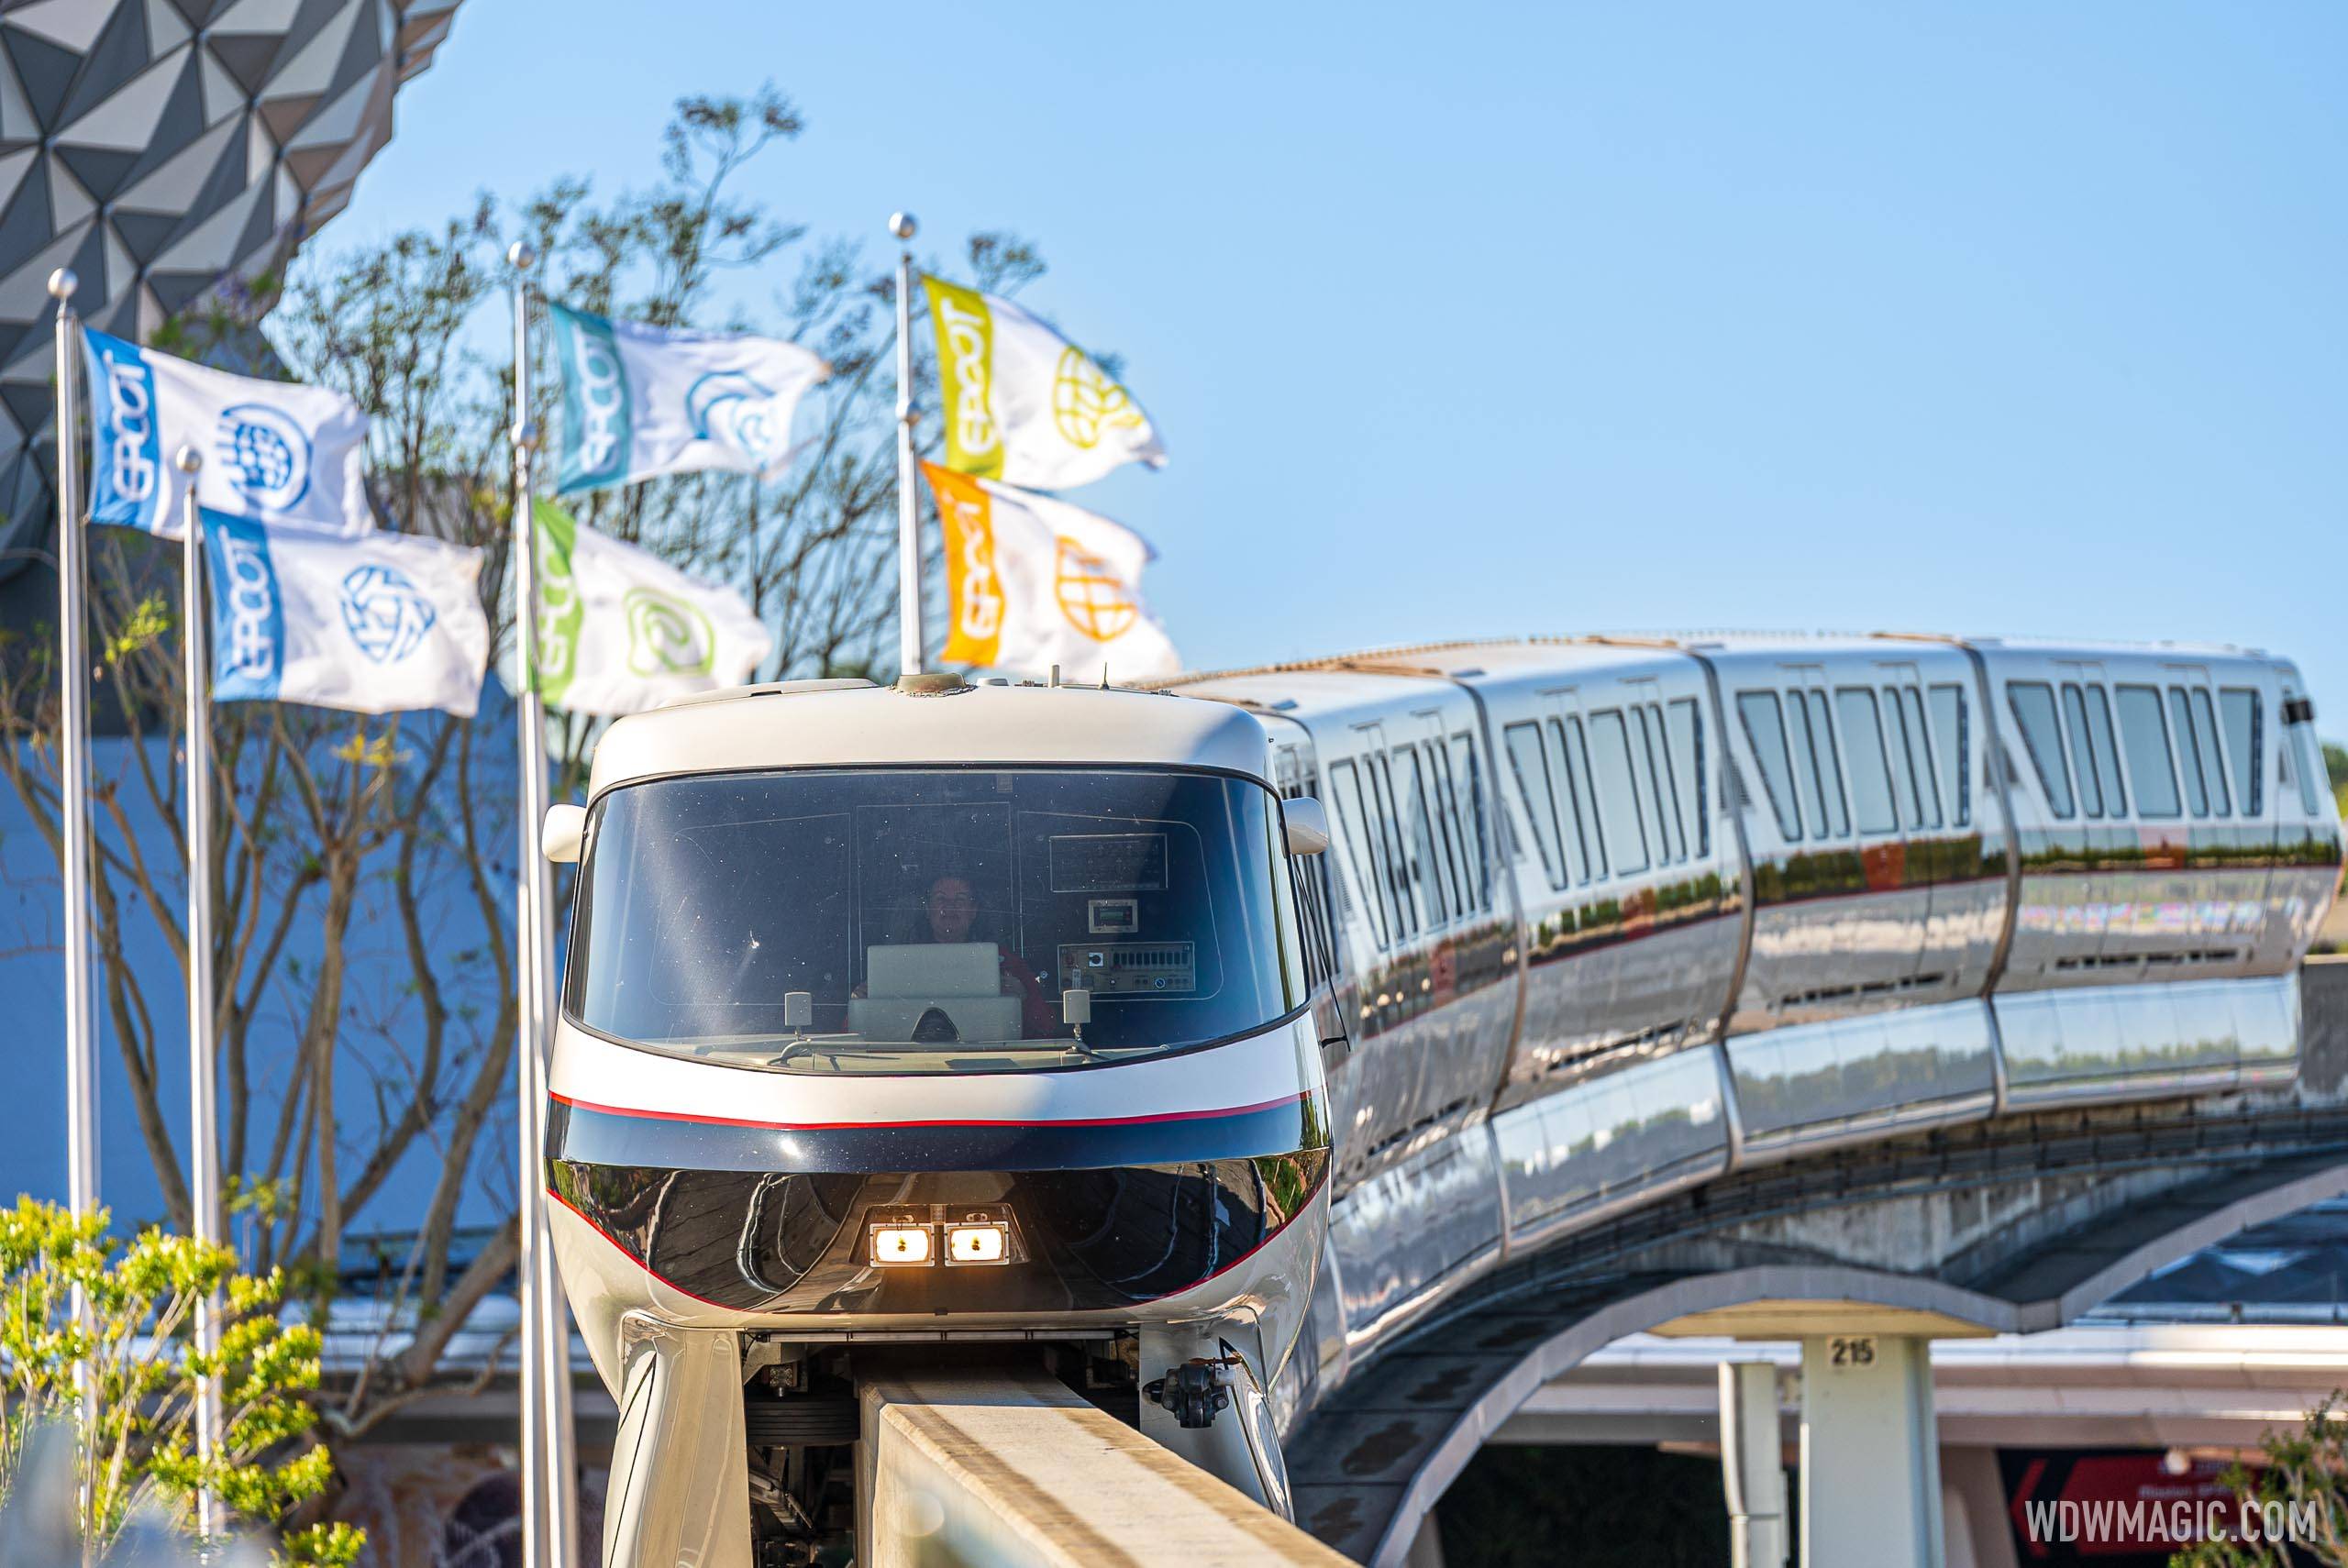 Polynesian Village Resort monorail station confirmed to be closed through to July 2021